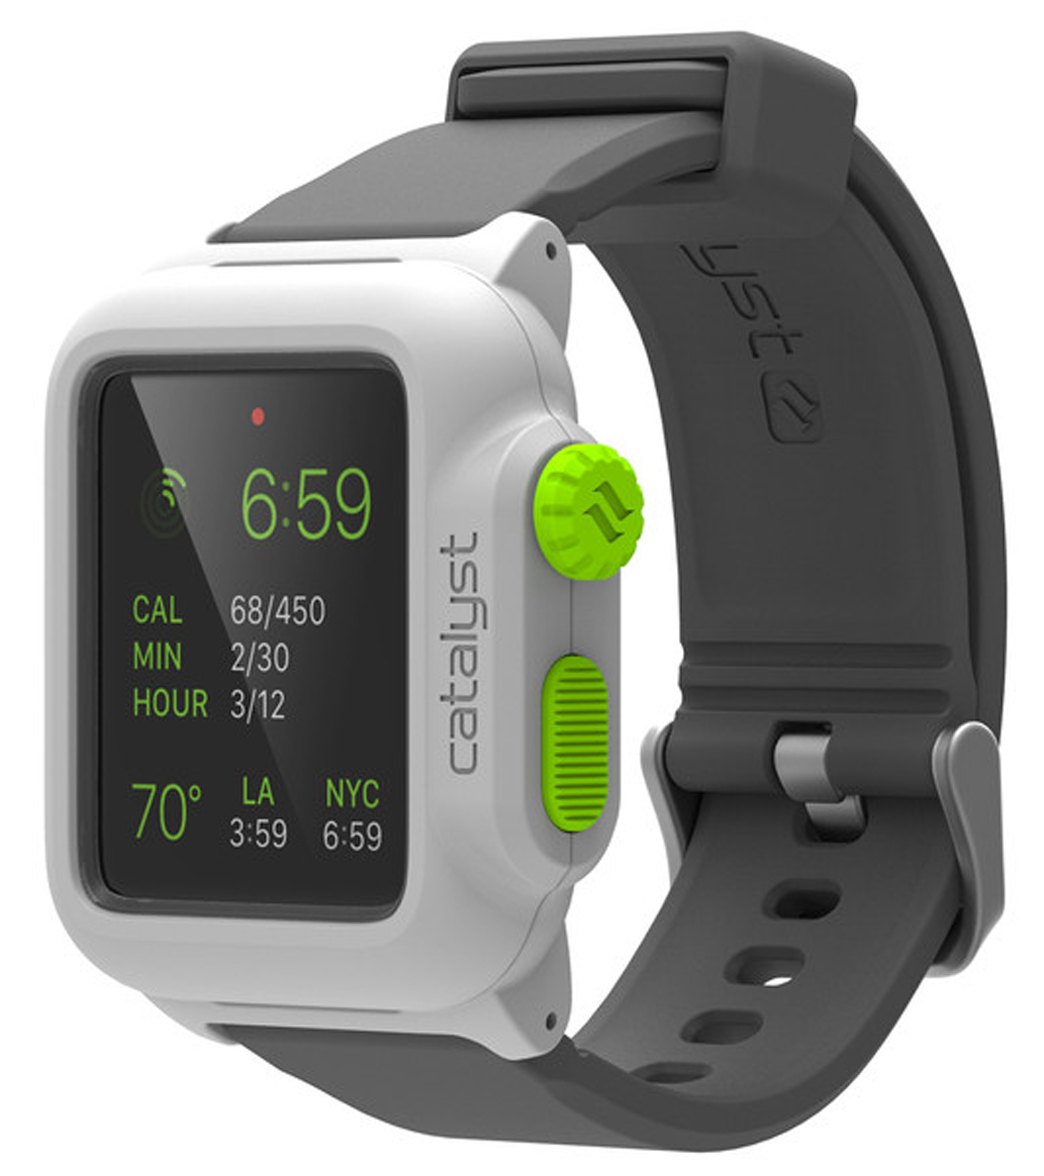 Catalyst Waterproof Apple Watch Case 42mm at SwimOutlet.com - Free Shipping